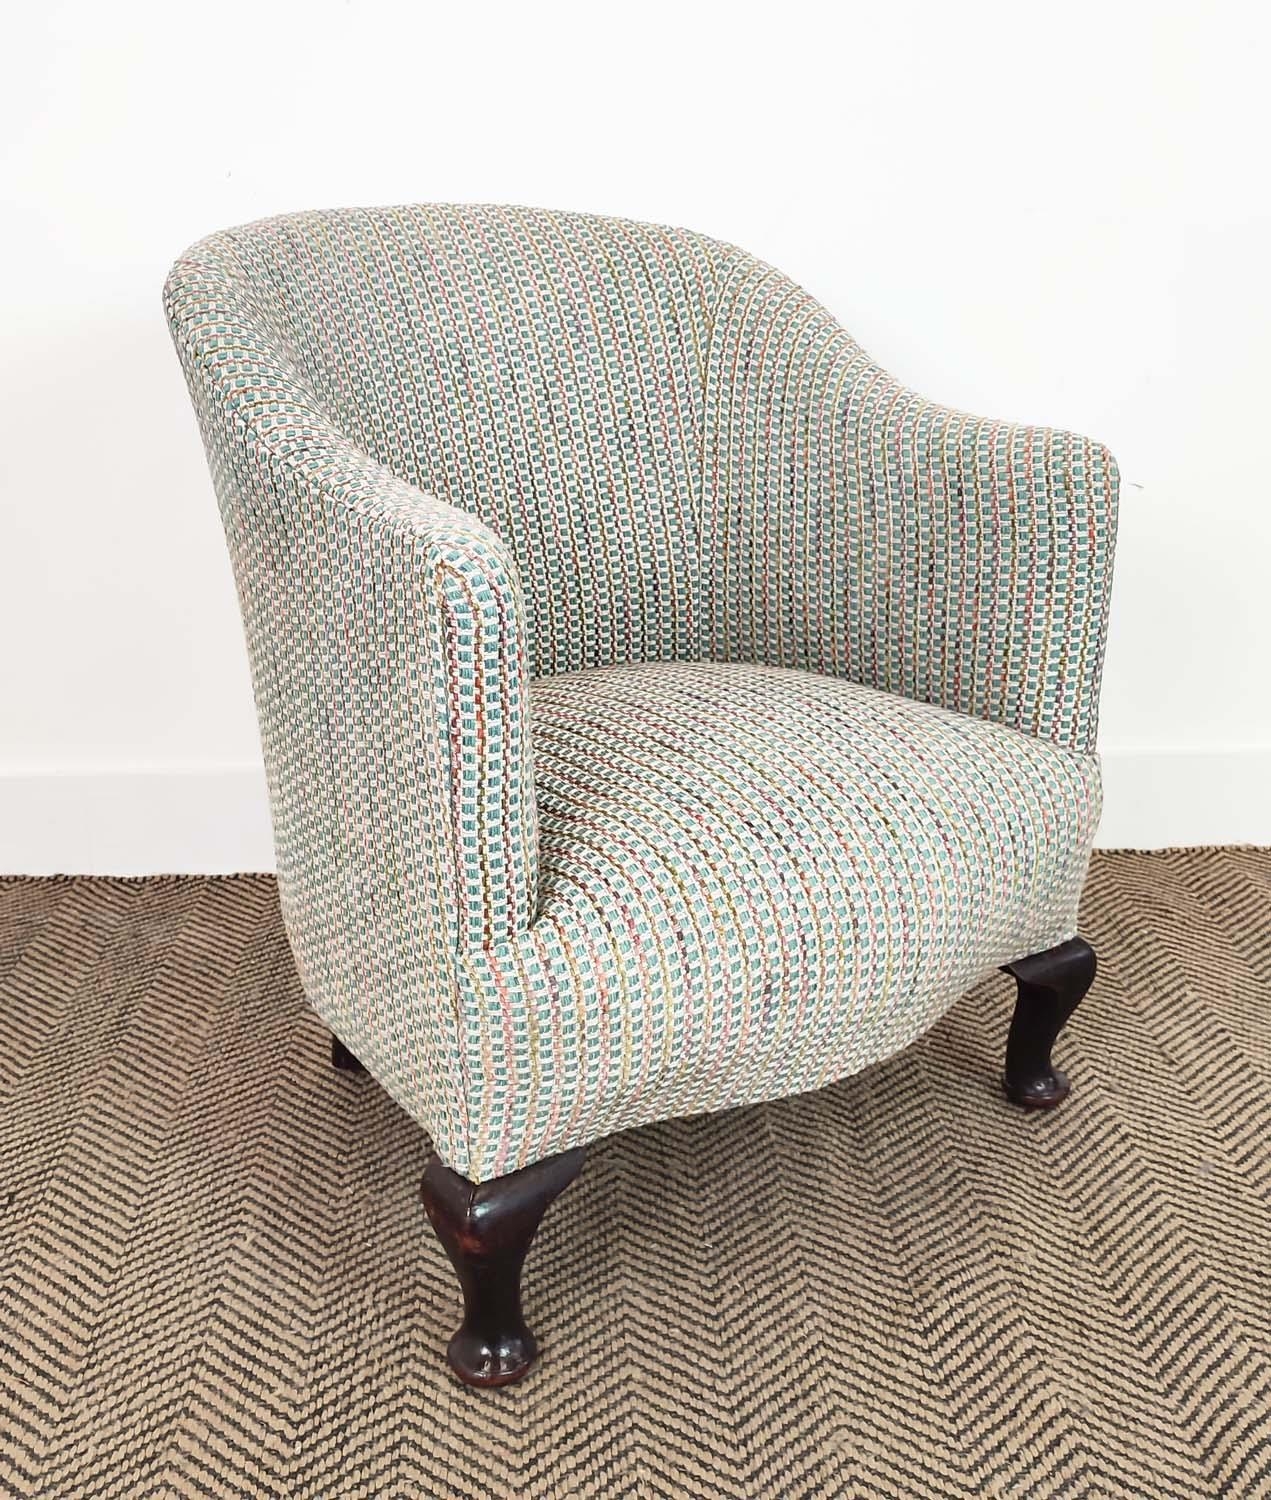 TUB CHAIR, Edwardian mahogany in patterned chenille, 71cm H x 58cm.